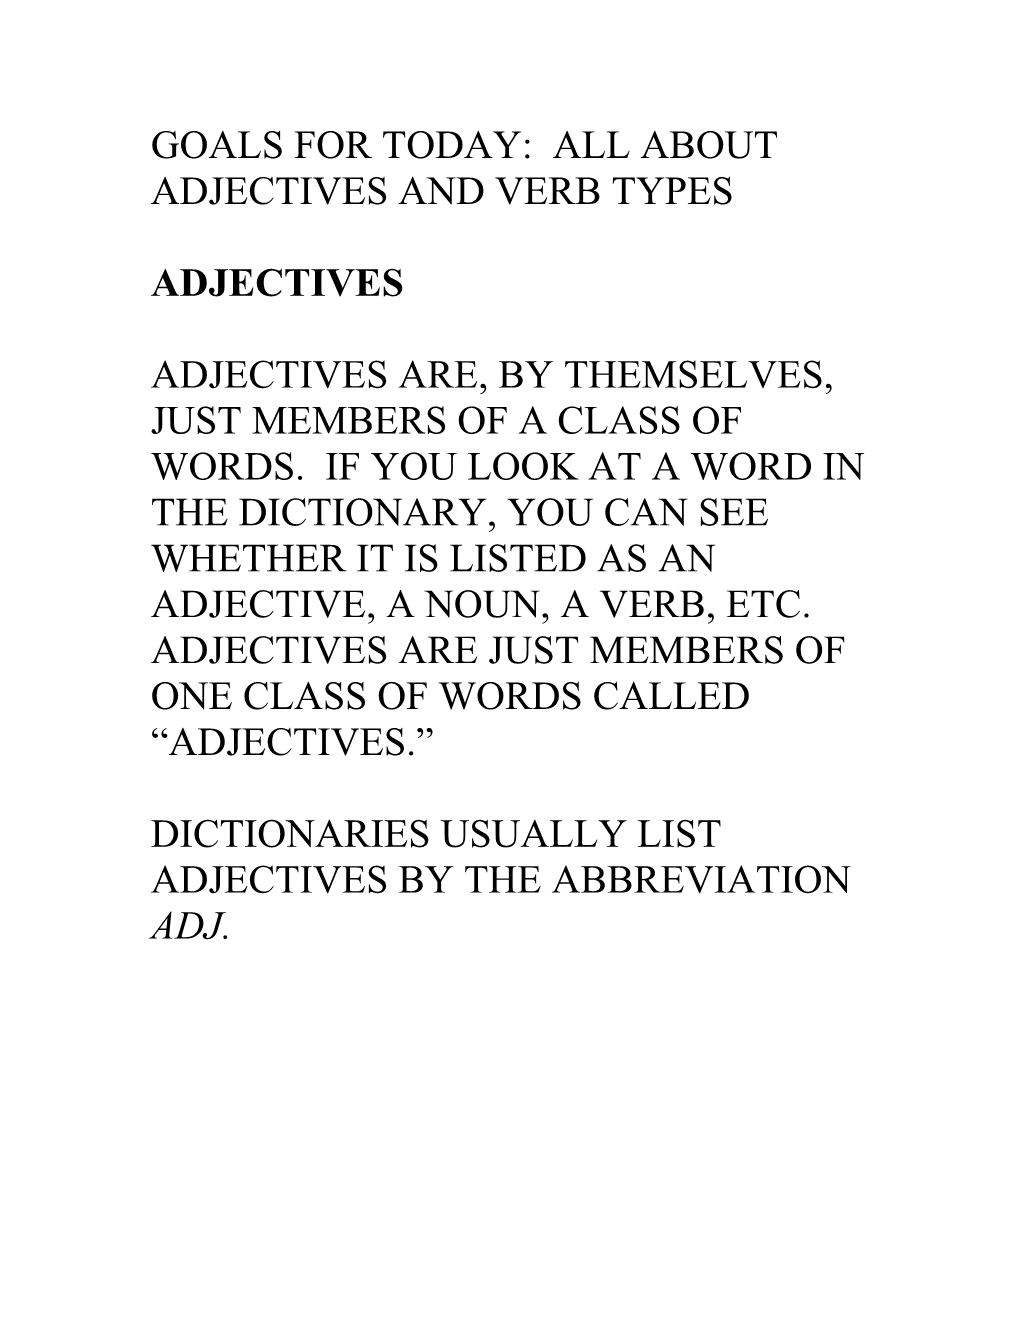 Goals for Today: All About Adjectives and Verb Types